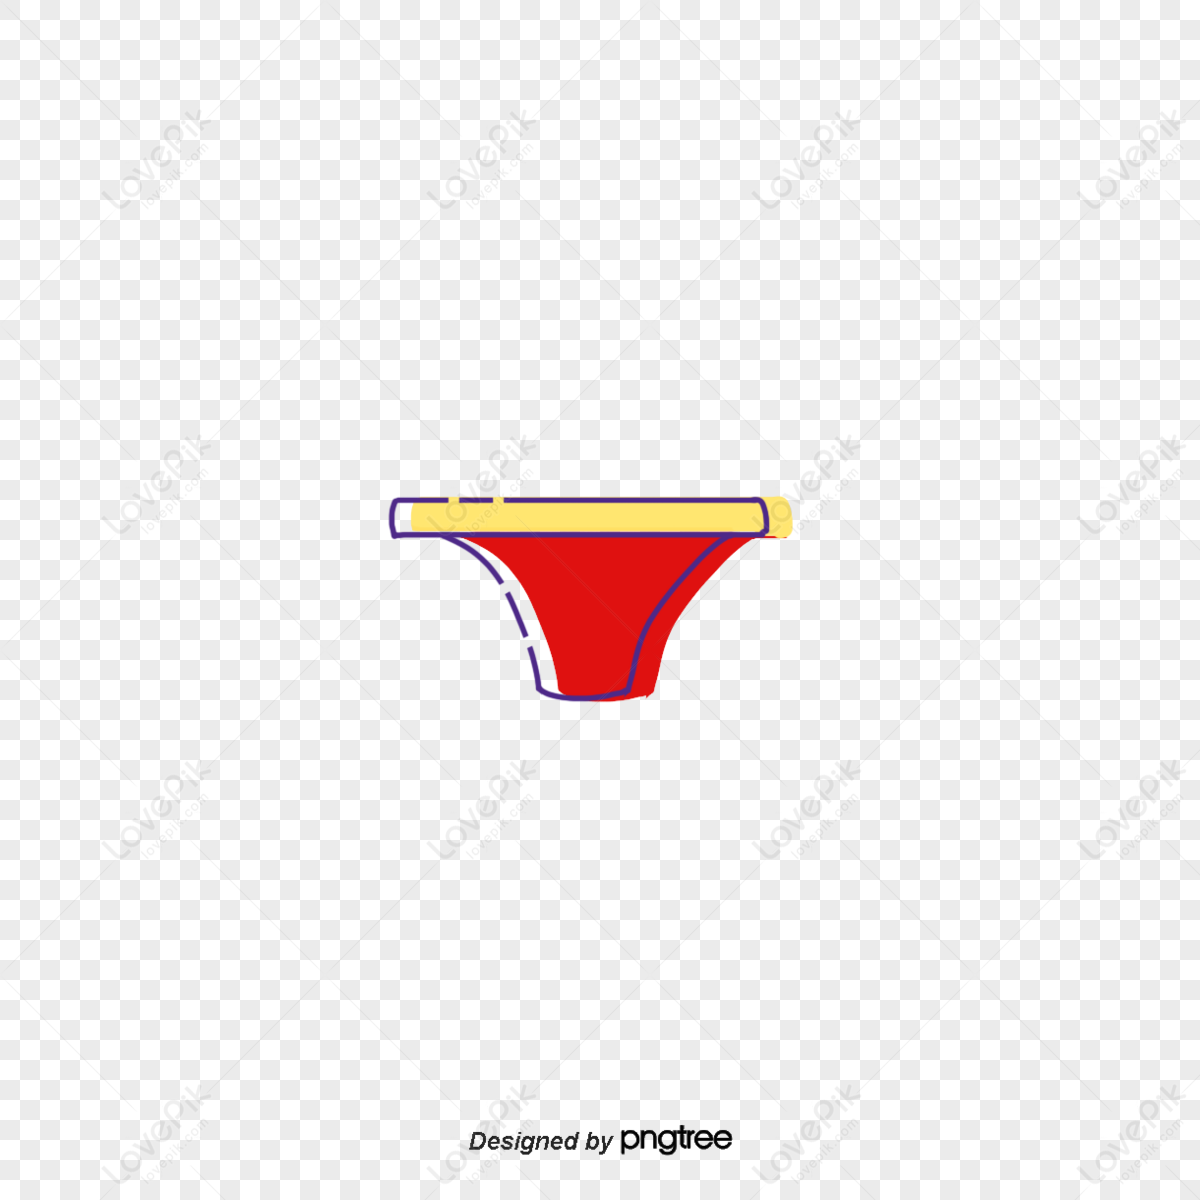 Red Lace Panties Png Transparent PNG - 968x896 - Free Download on